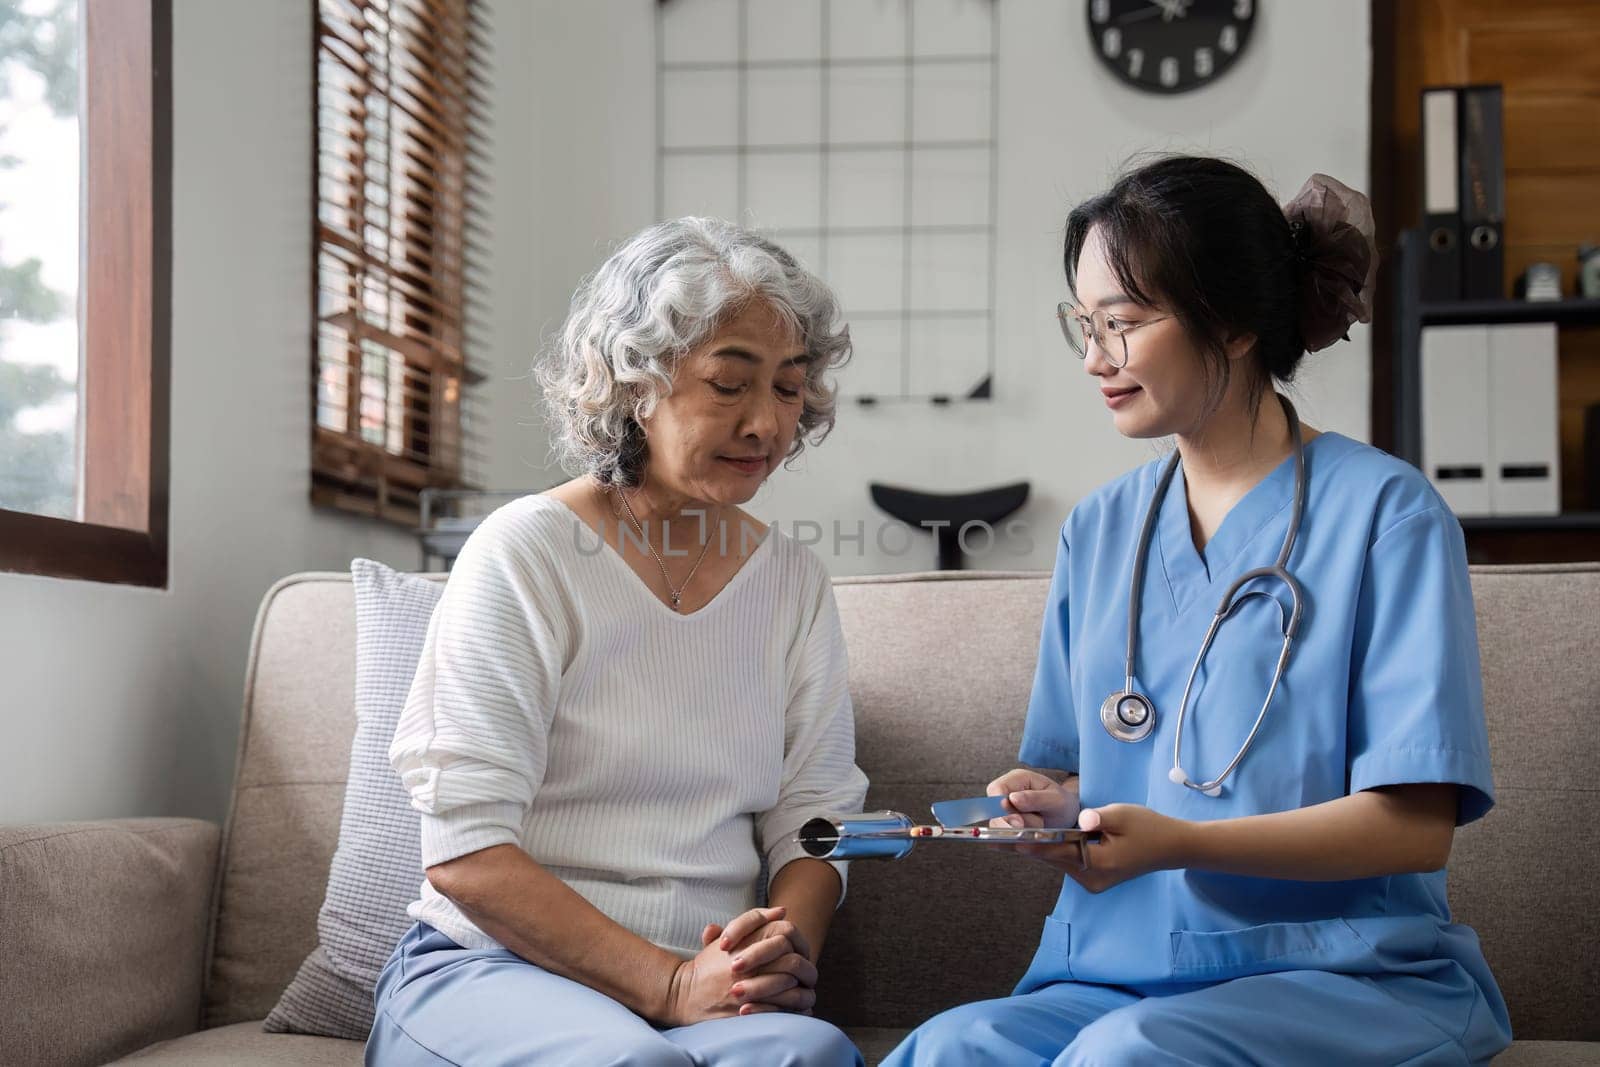 Elderly caregivers are helping to check the health and care for an elderly woman at home..